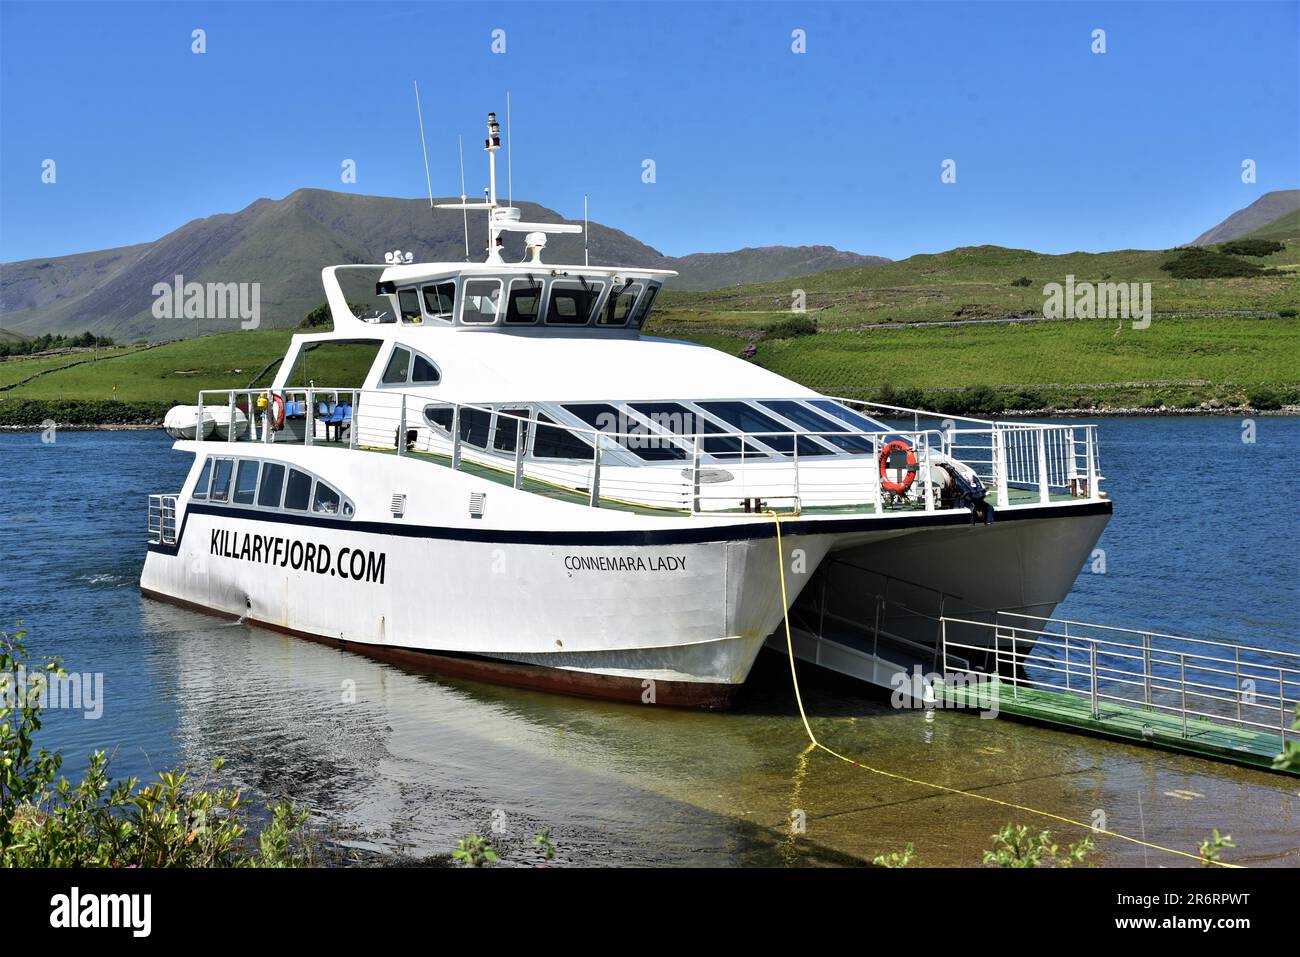 Republic of Ireland feature, pictures show location of the film the Field. KILLARY FJORD, Connemara cottage, donkeys, RIVER OWENRIFF, County Galway Stock Photo